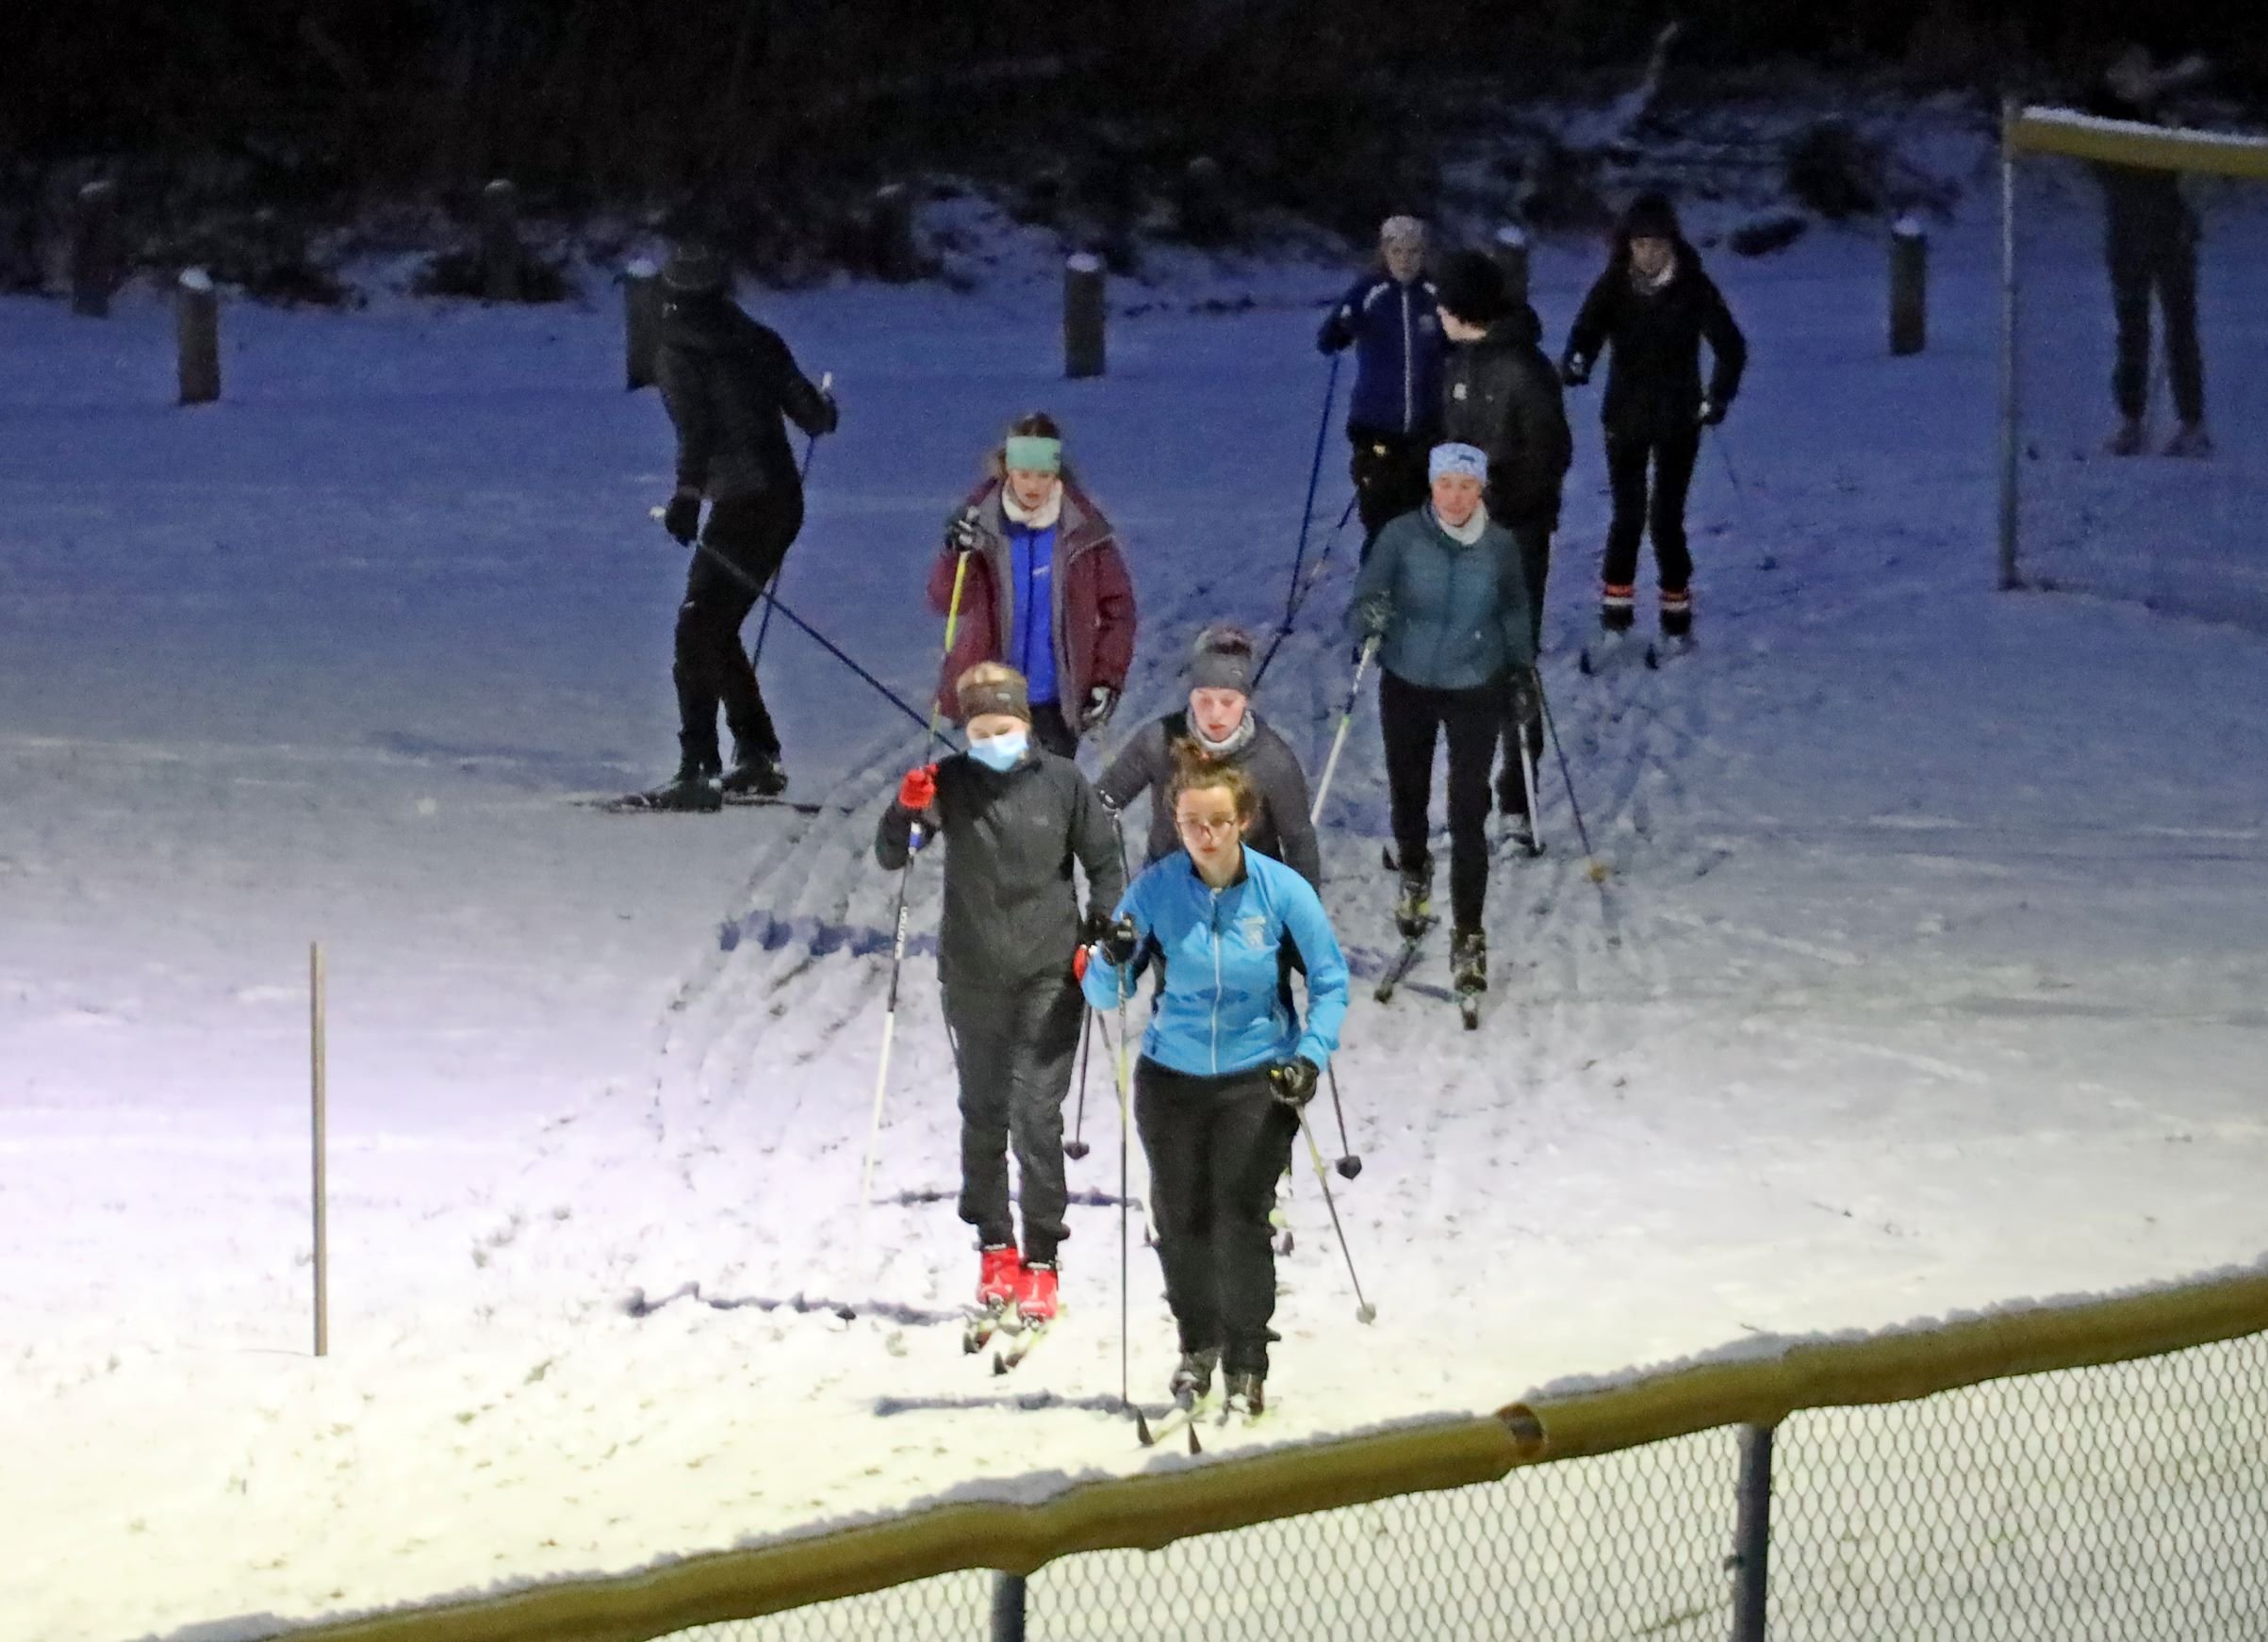  Harwood Union High School Nordic ski team skiers get in a training session at Dac Rowe Park before Mother Nature washed away the early December snowfall. Photo by Gordon Miller 